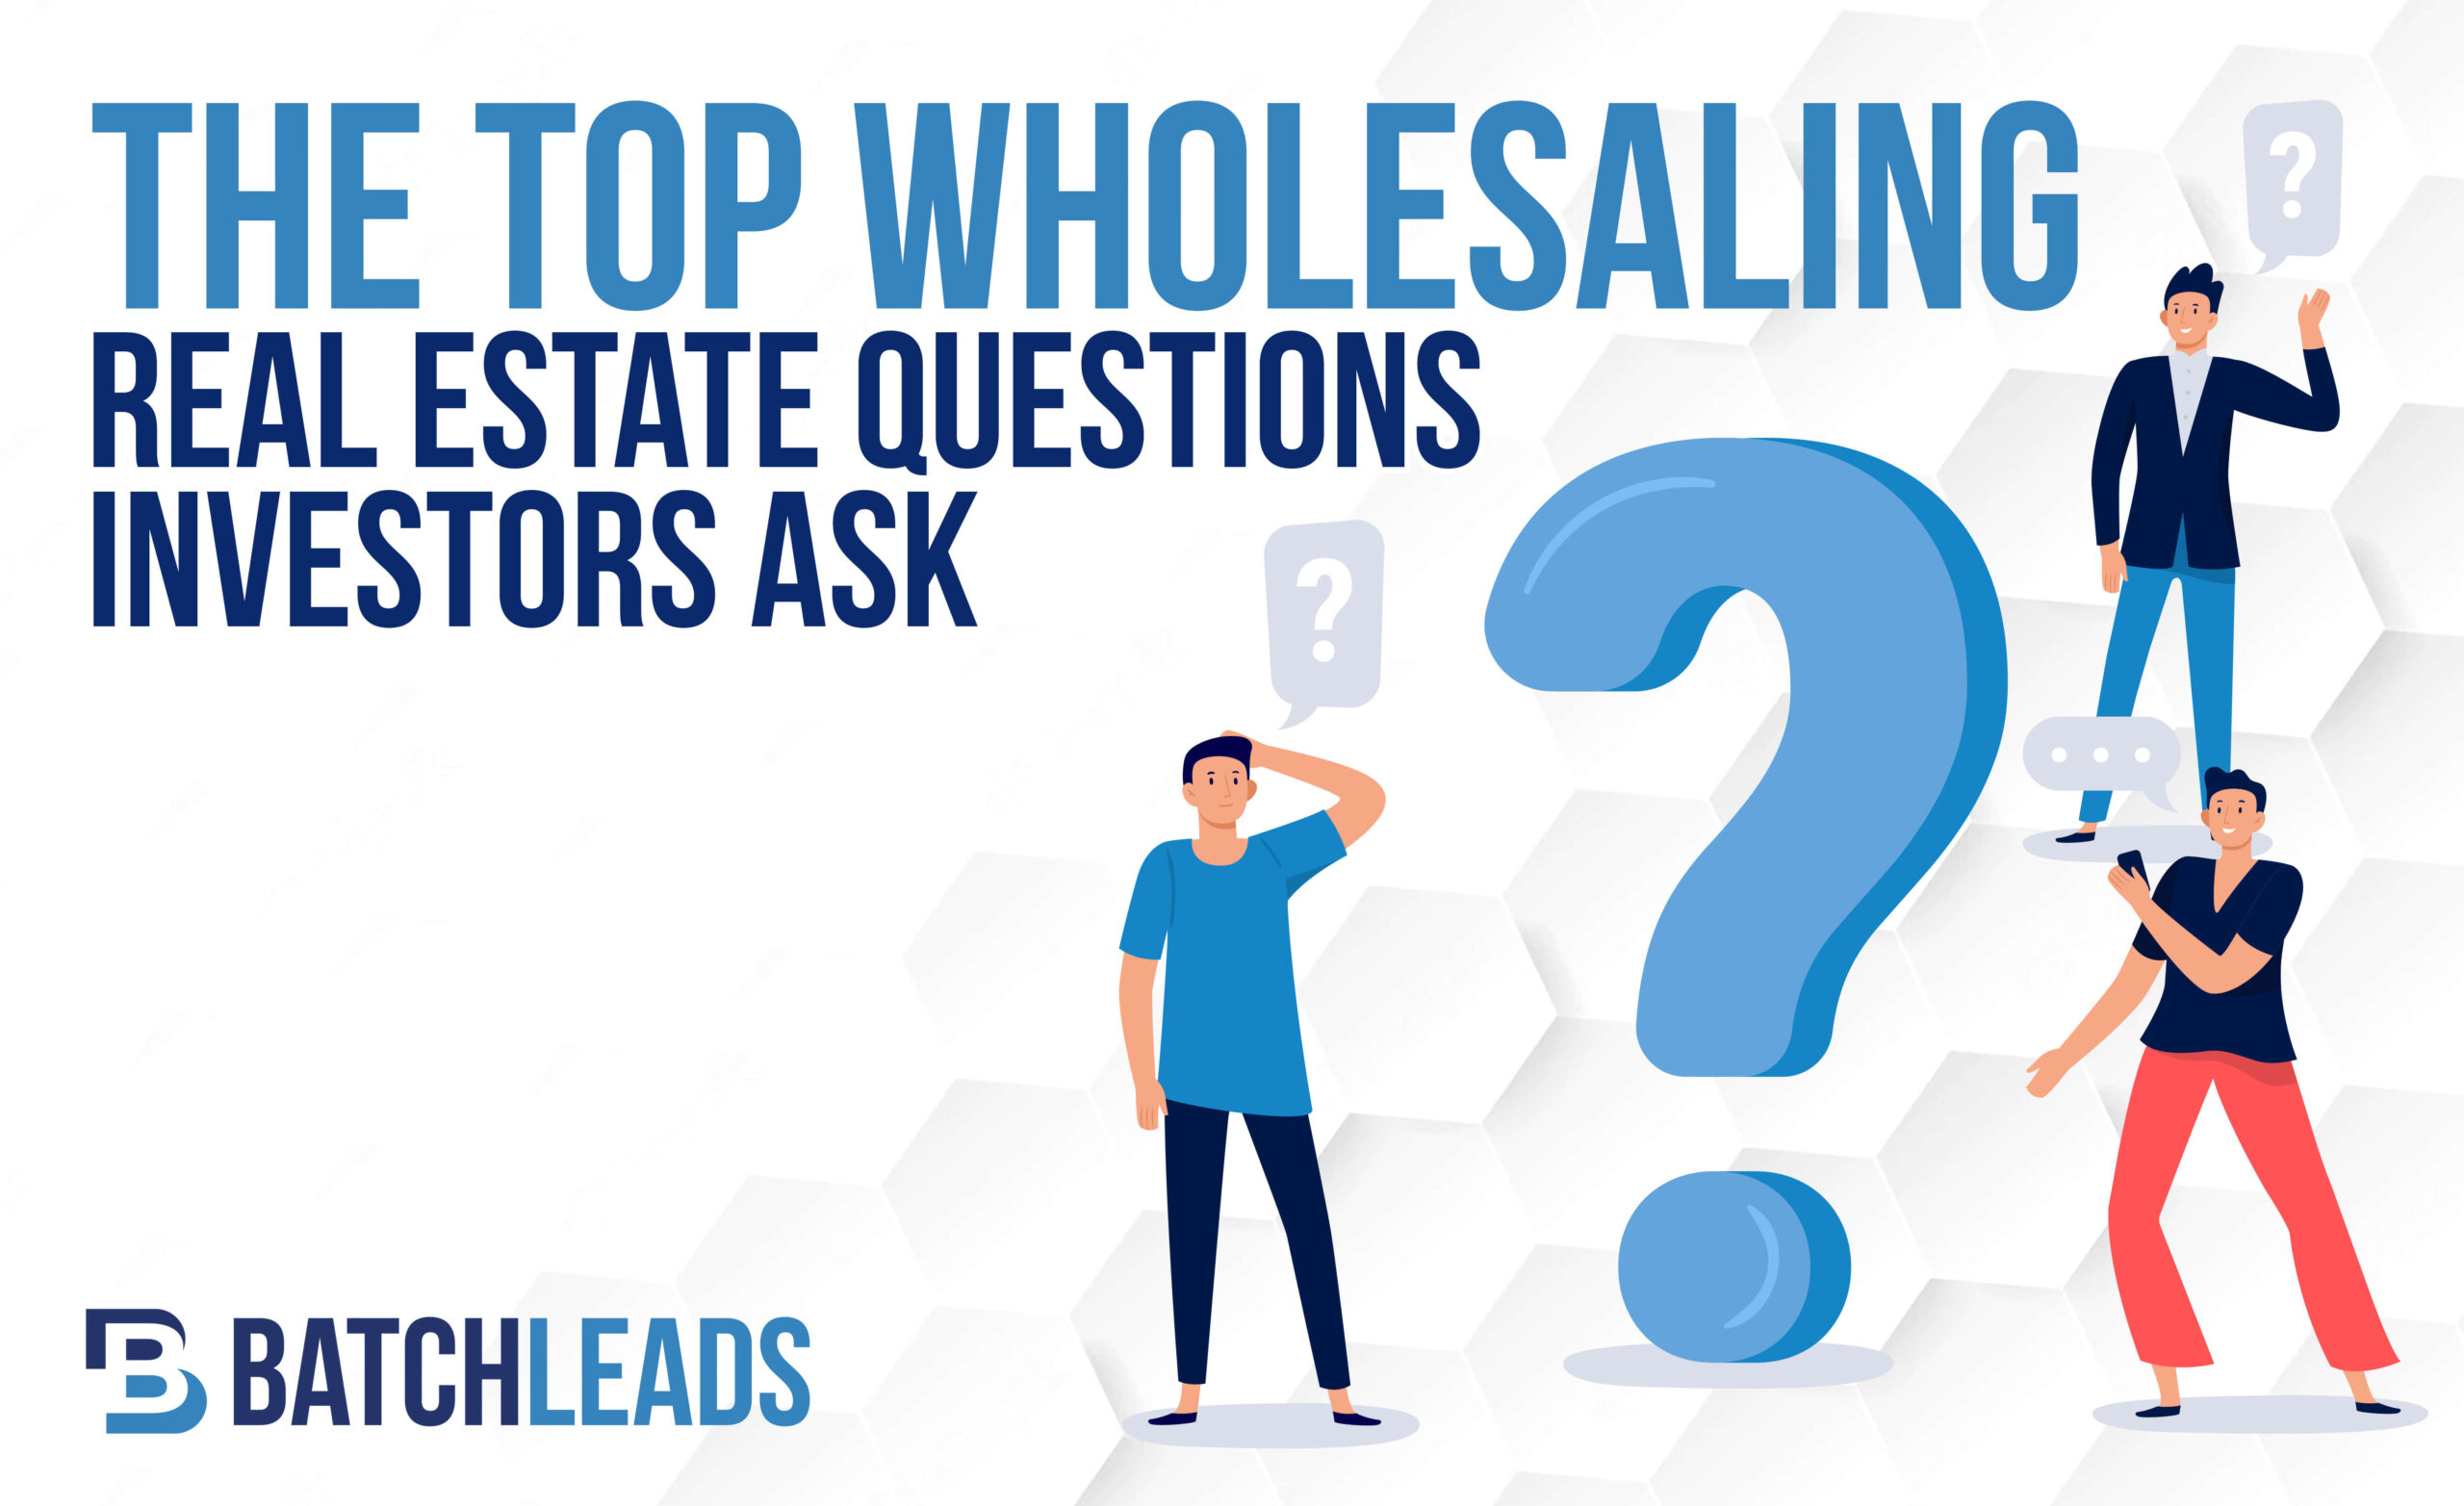 The Top Wholesaling Real Estate Questions Investors Ask